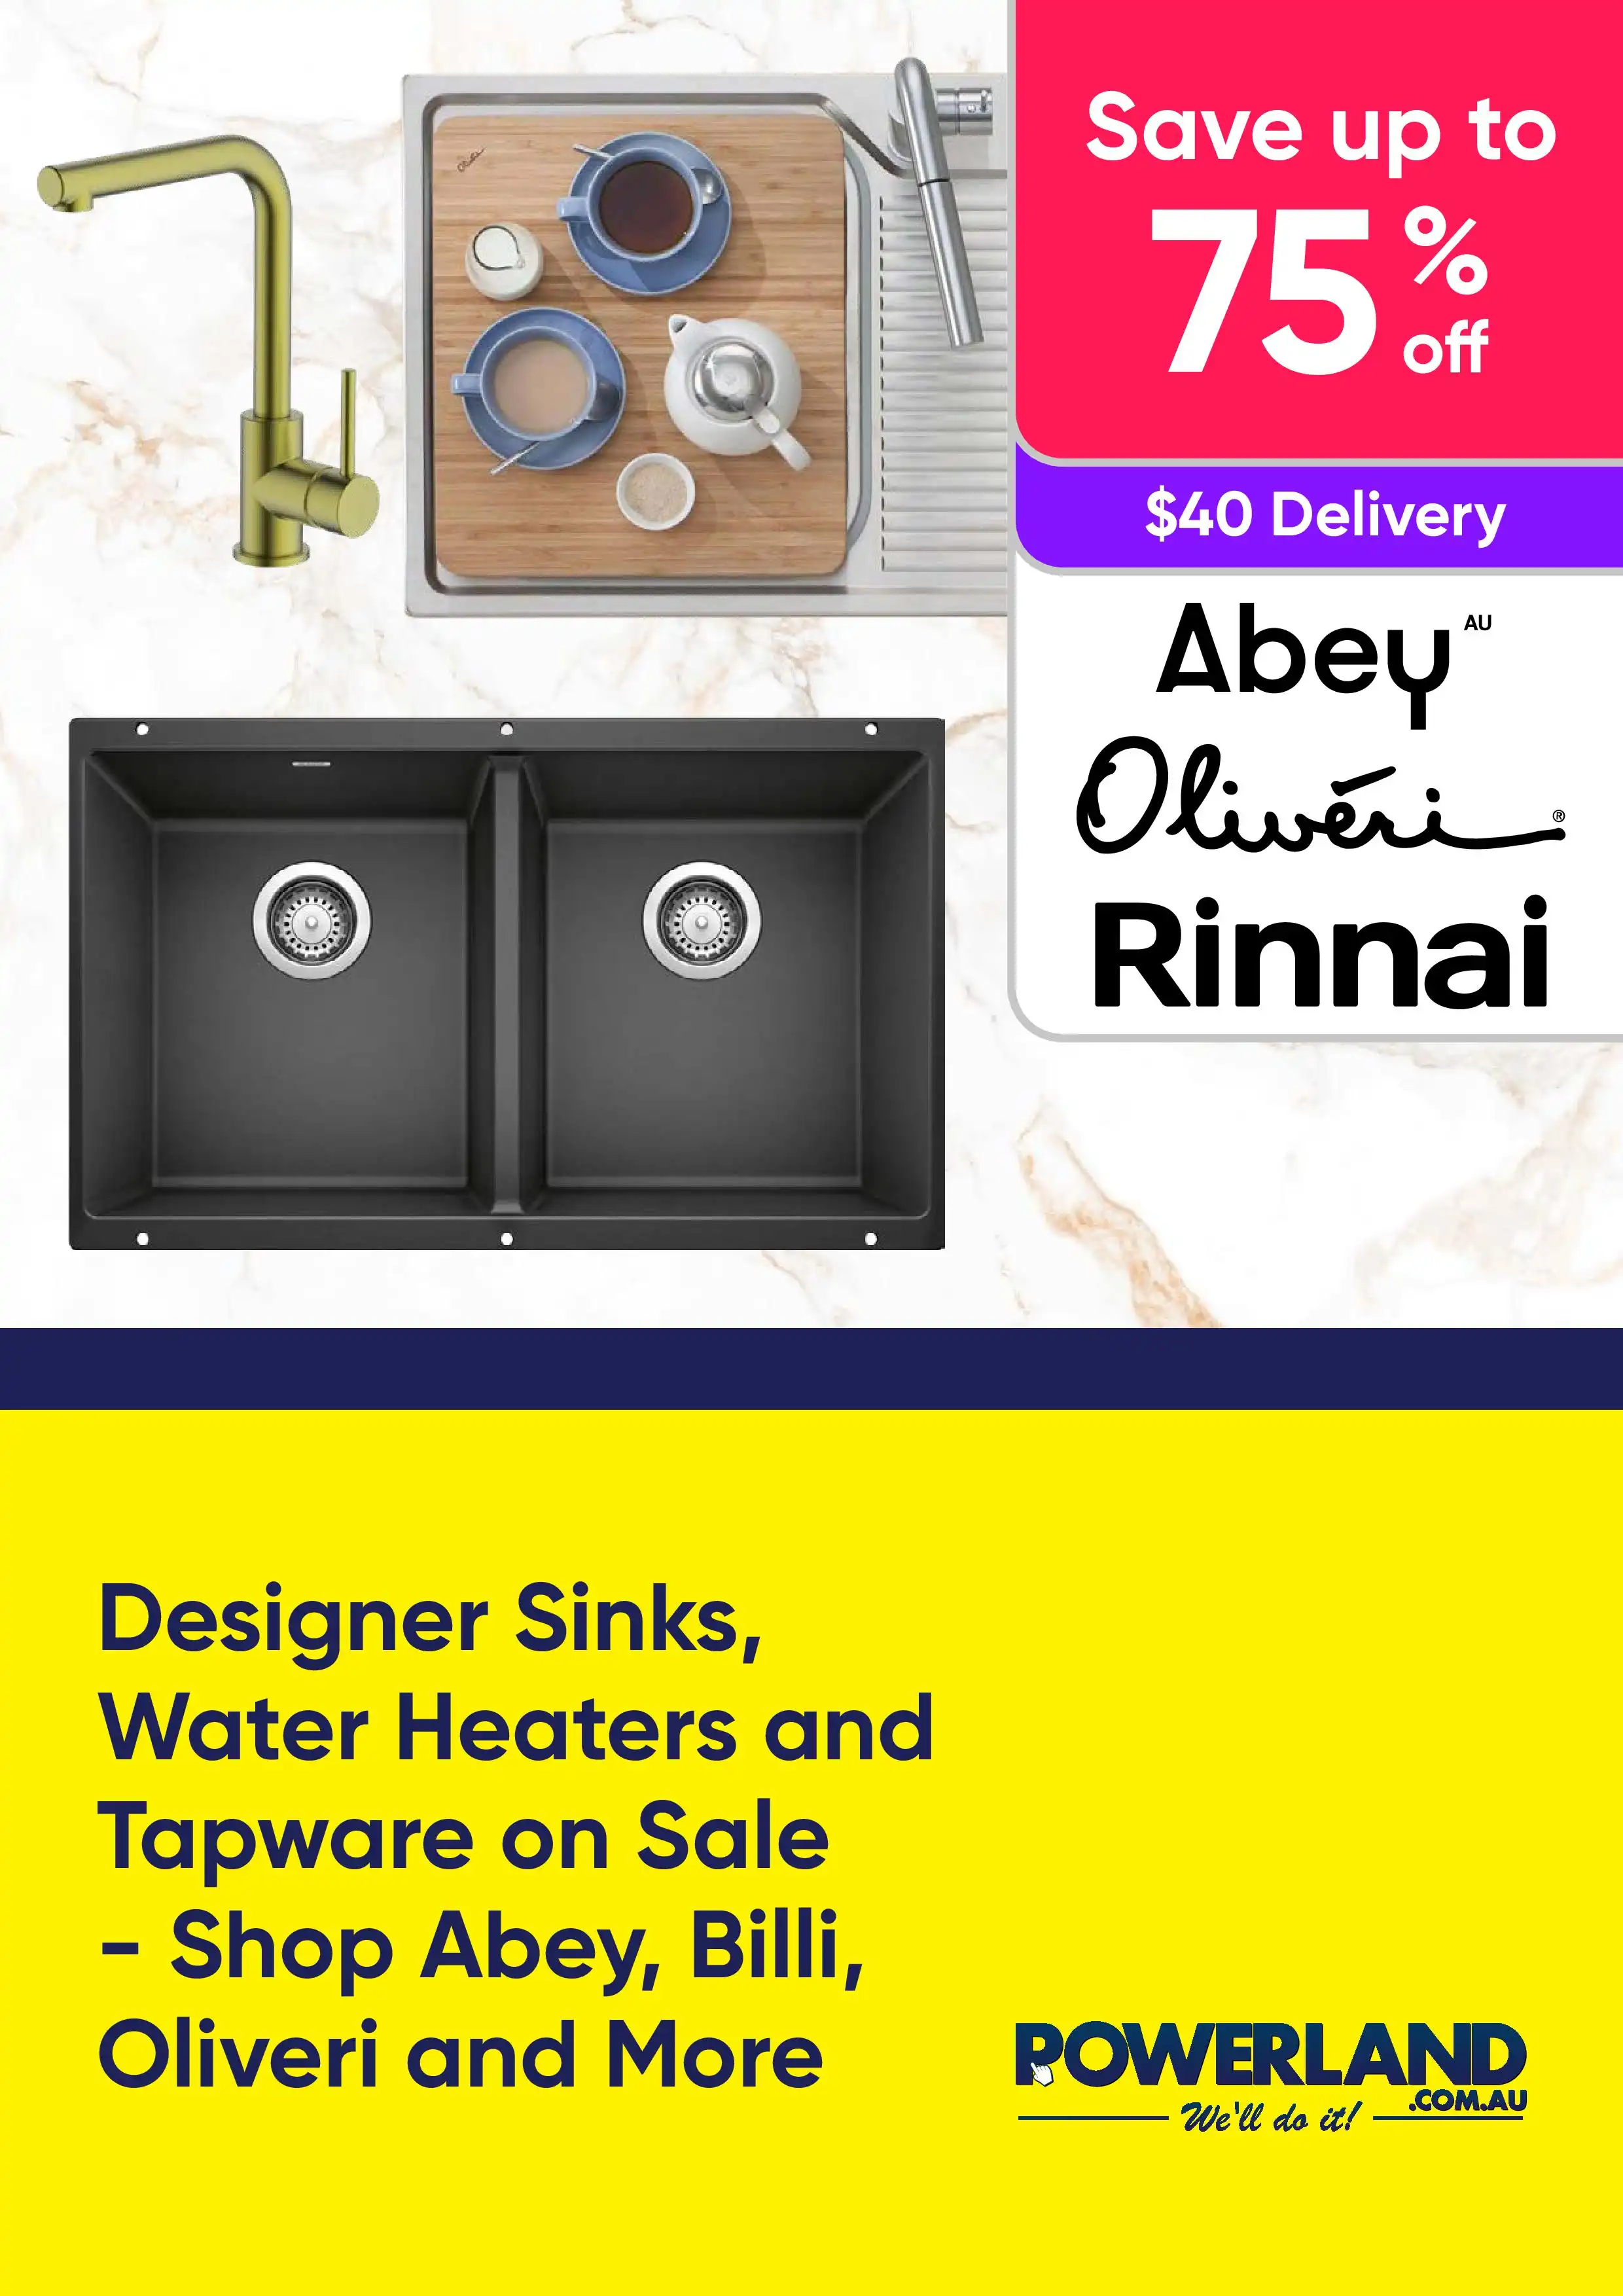 Save Up To 75% Off RRP on Designer Sinks, Water Heaters and Tapware